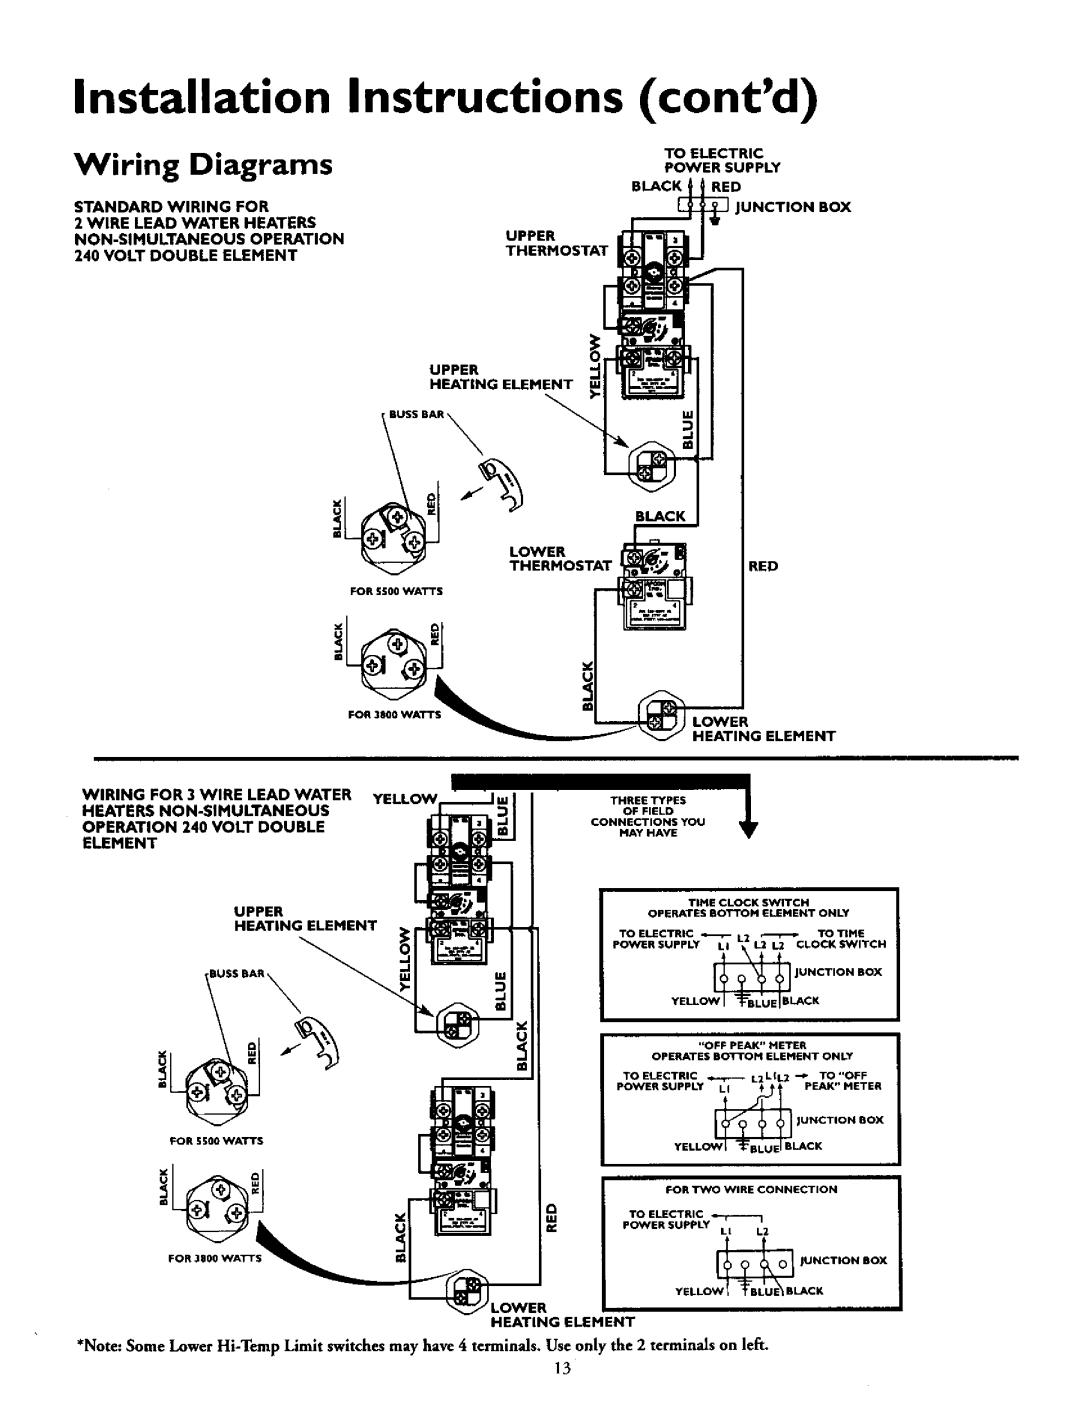 Kenmore 153.316152 Installation Instructions contd, Wiring Diagrams, Standard Wiring For, Volt Double Element, Junction 